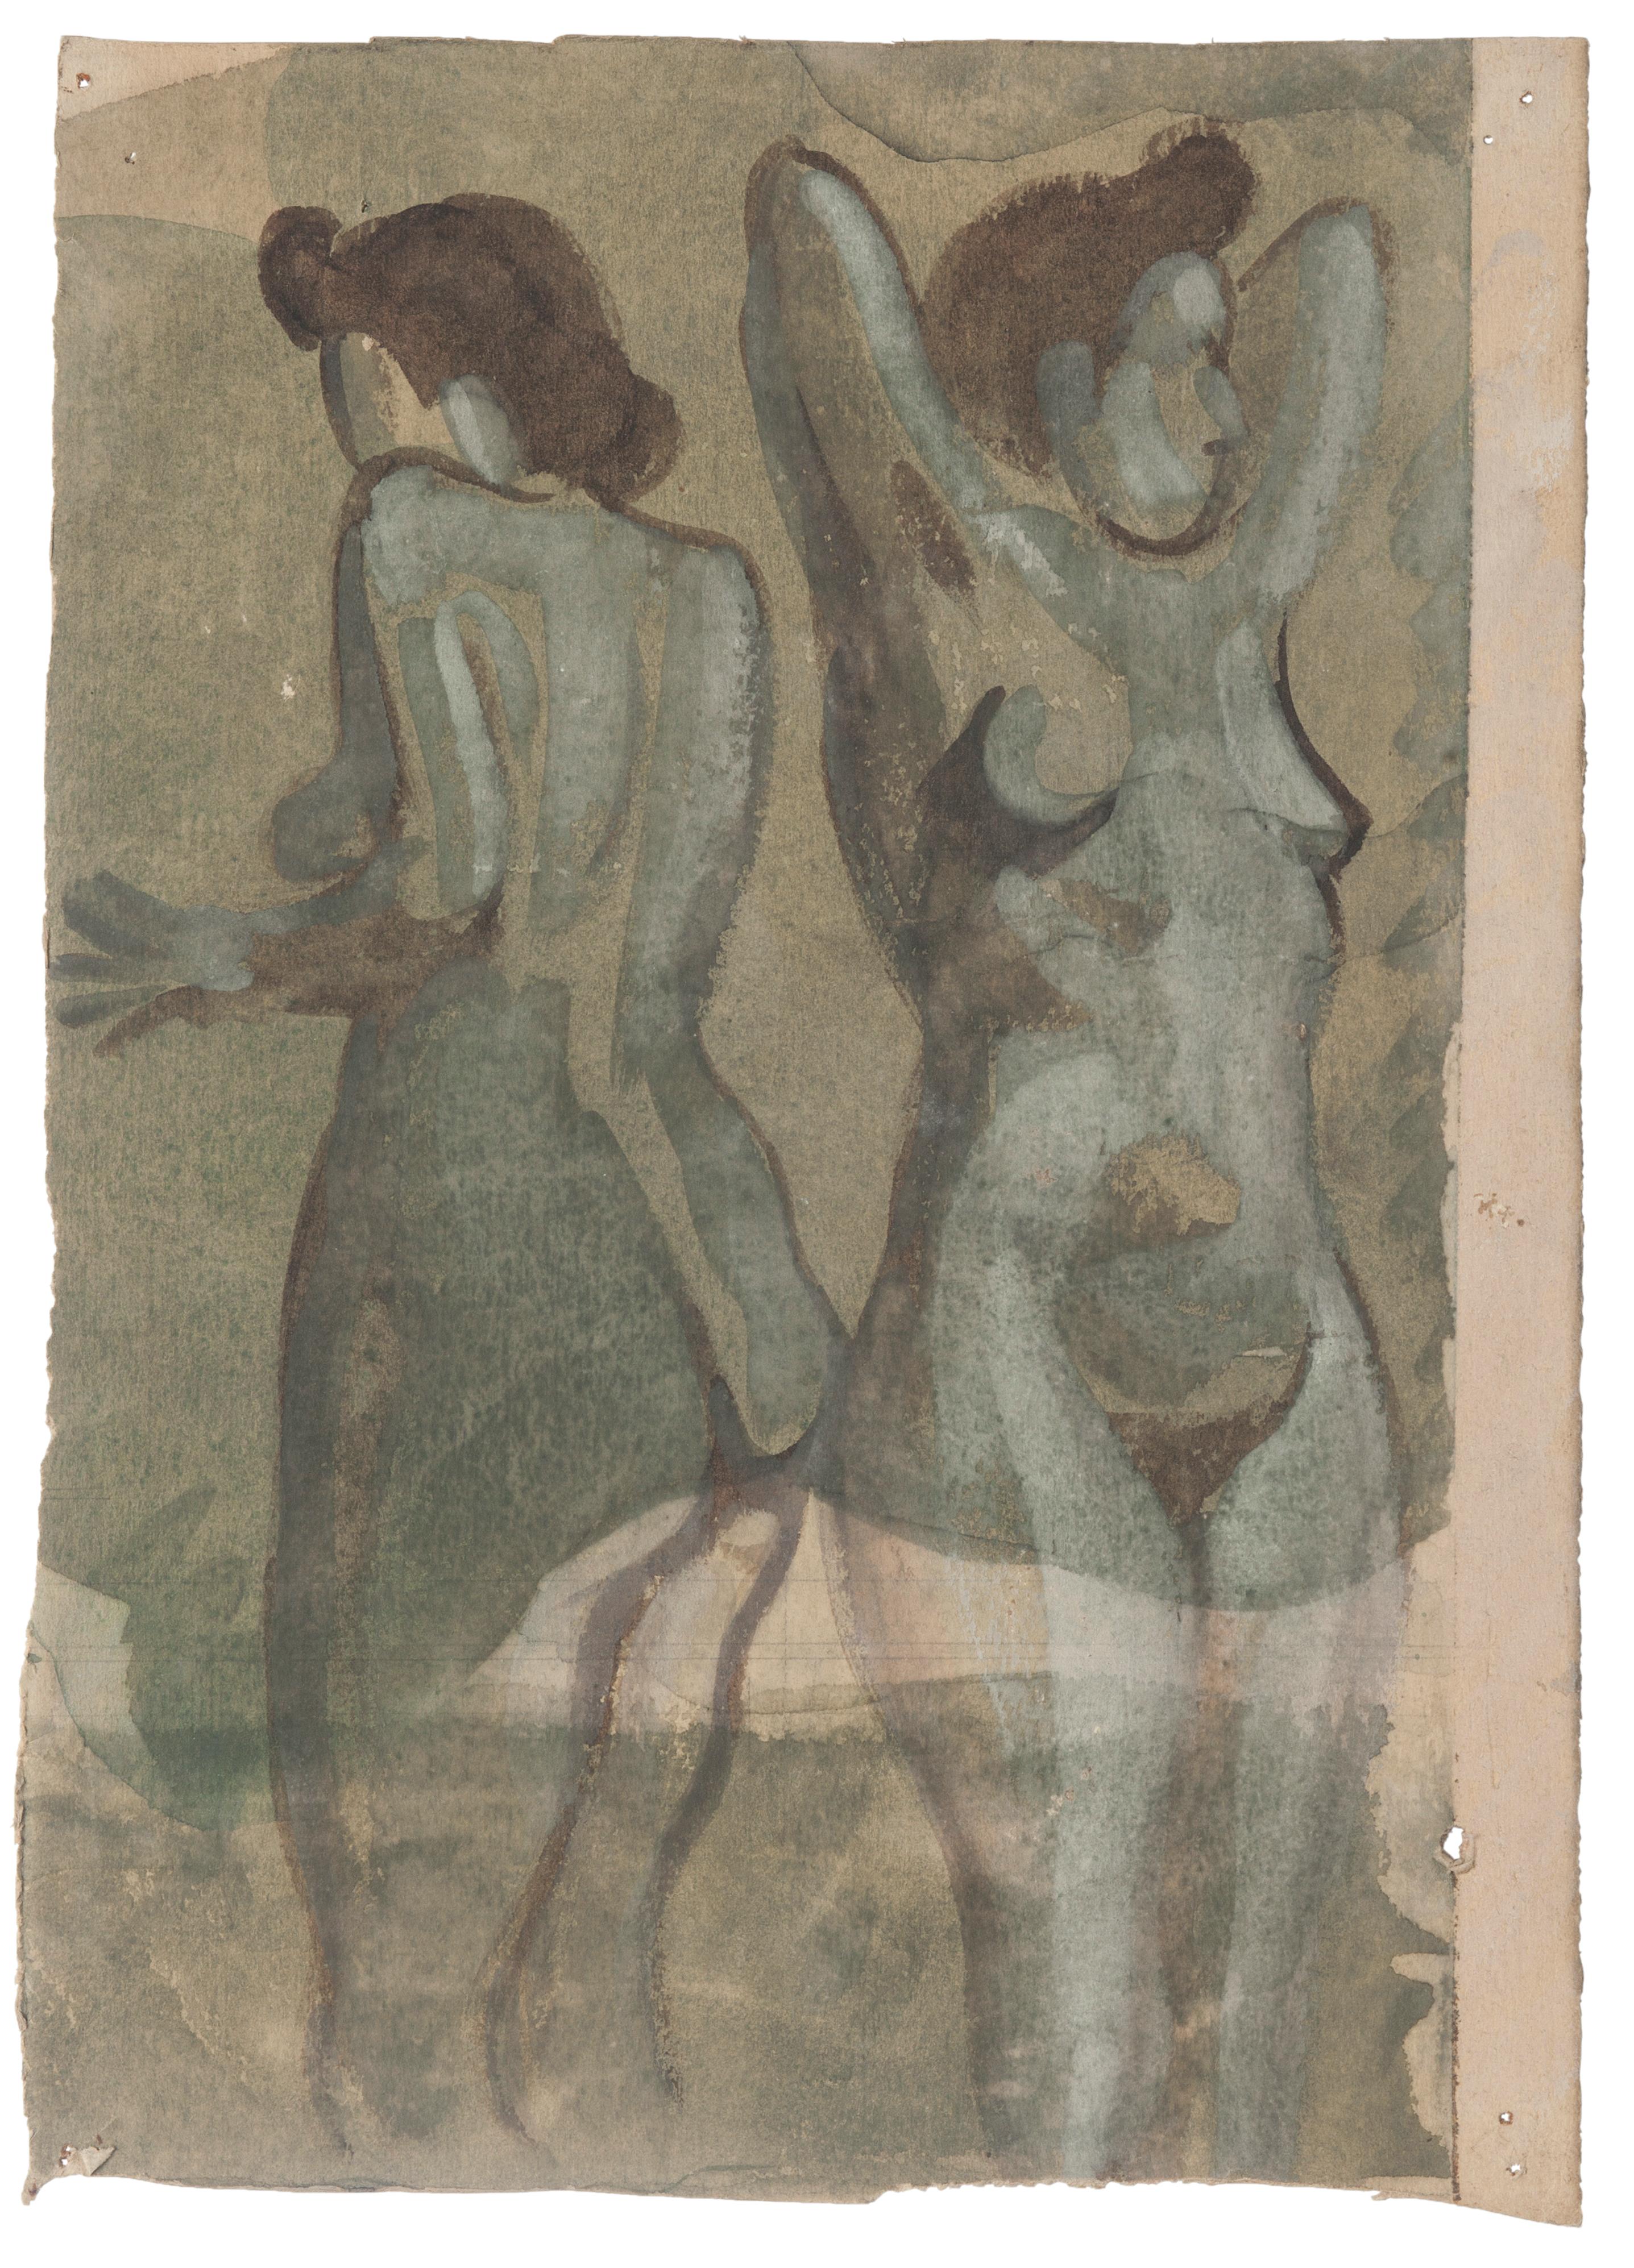 Nude is an original drawing in watercolor a on paper, realized by Jean Delpech (1988-1916). 

Sheet dimension: 24 x 17.2 cm.

The artwork represents two naked women standing, skillfully created, through delicate lines and vivid colors.

Jean-Raymond